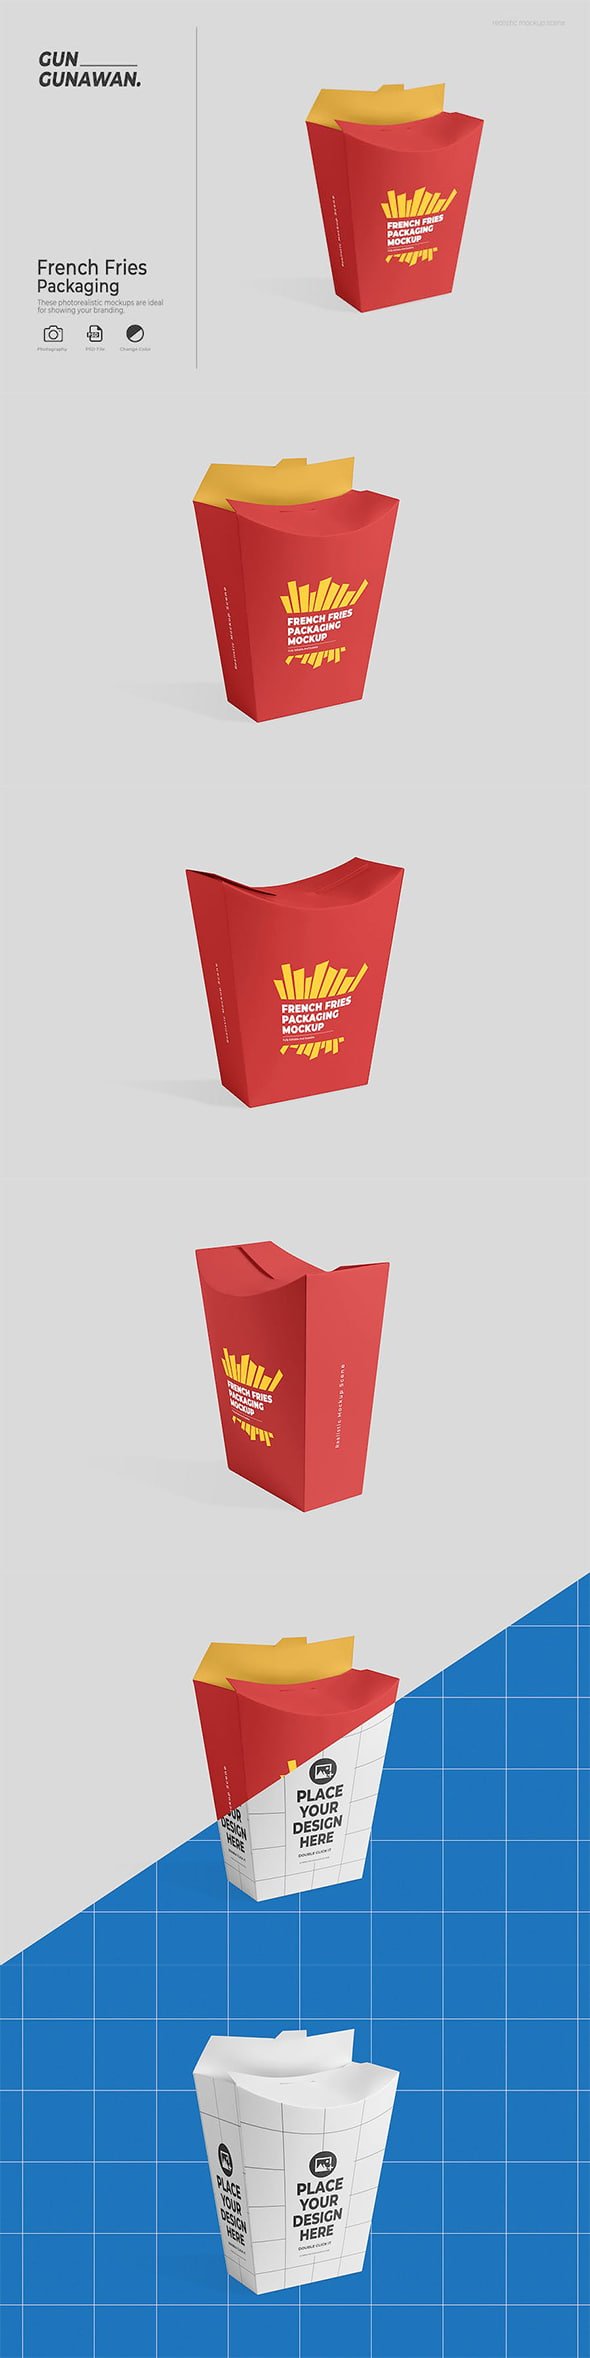 French Fries Packaging Mockup - ZYK58NP